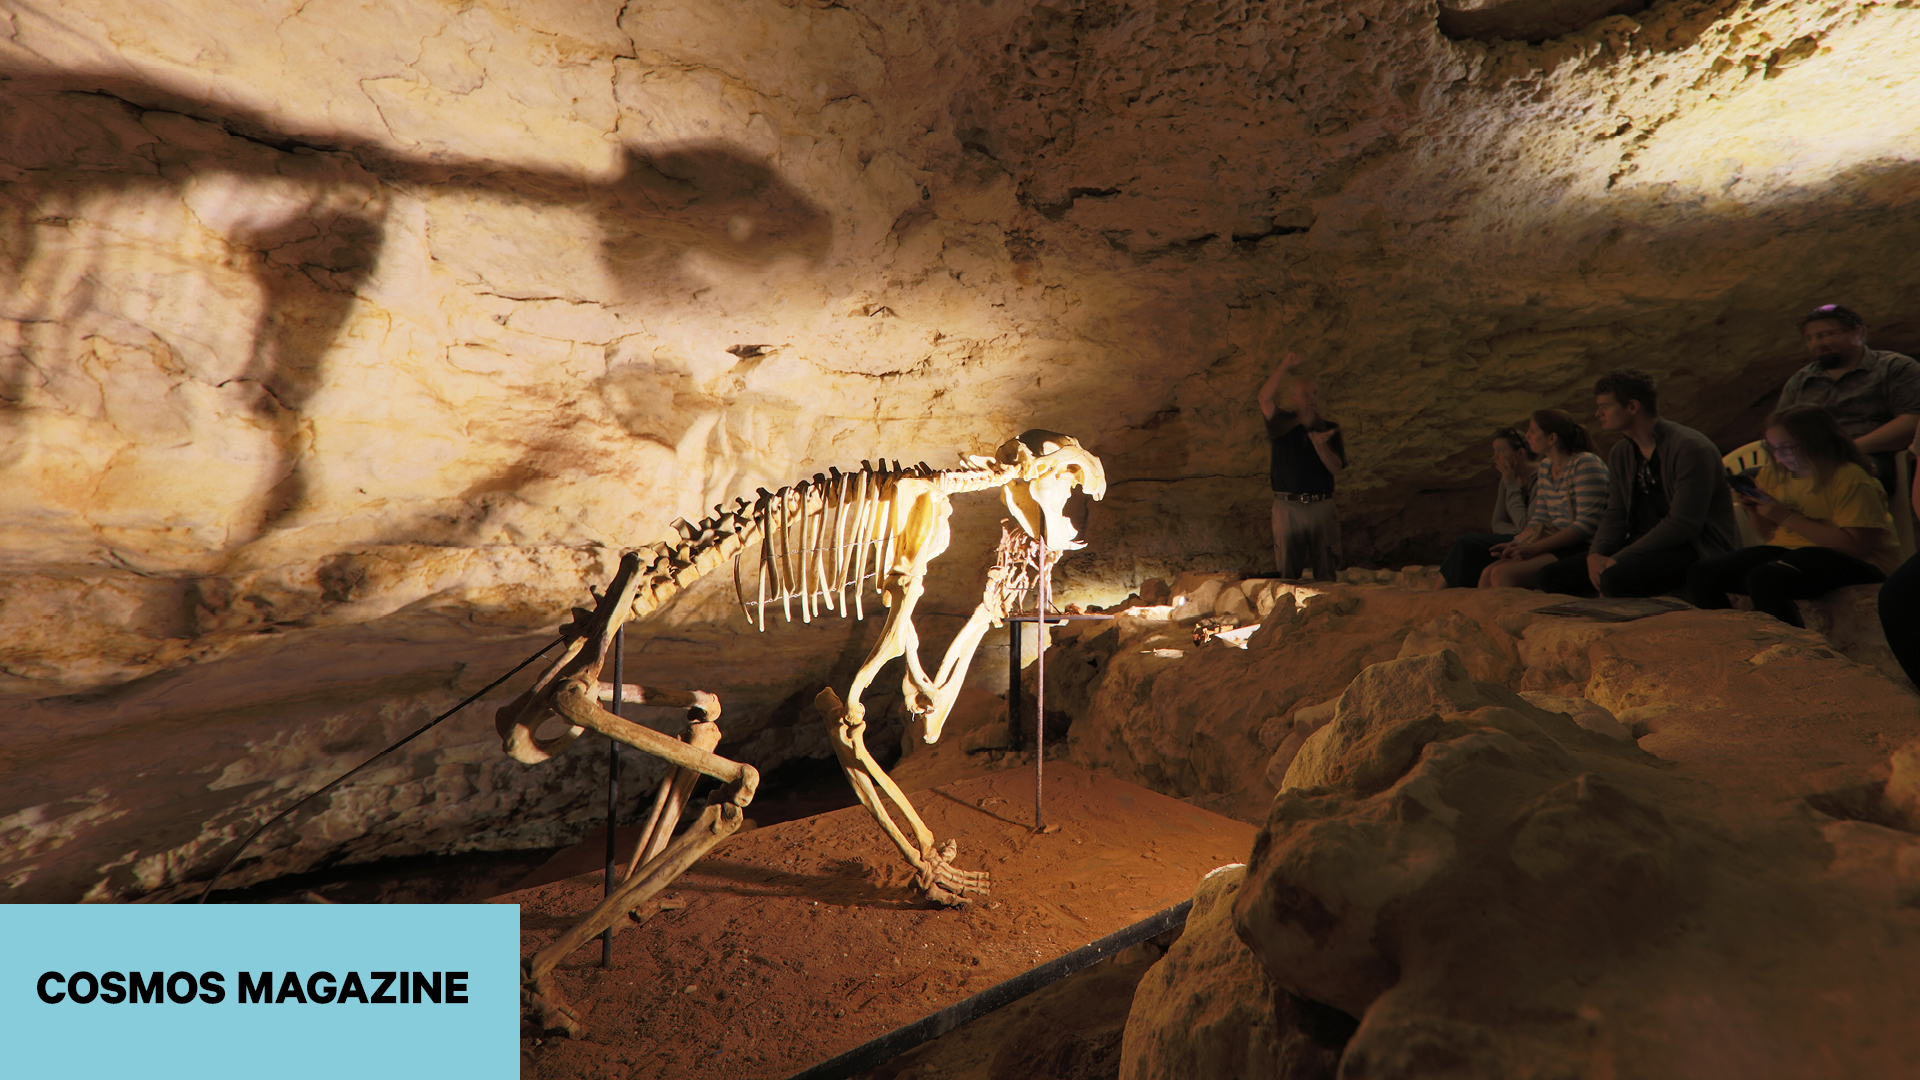 COSMOS MAGAZINE – Naracoorte Caves: A rolls-royce record of biodiversity